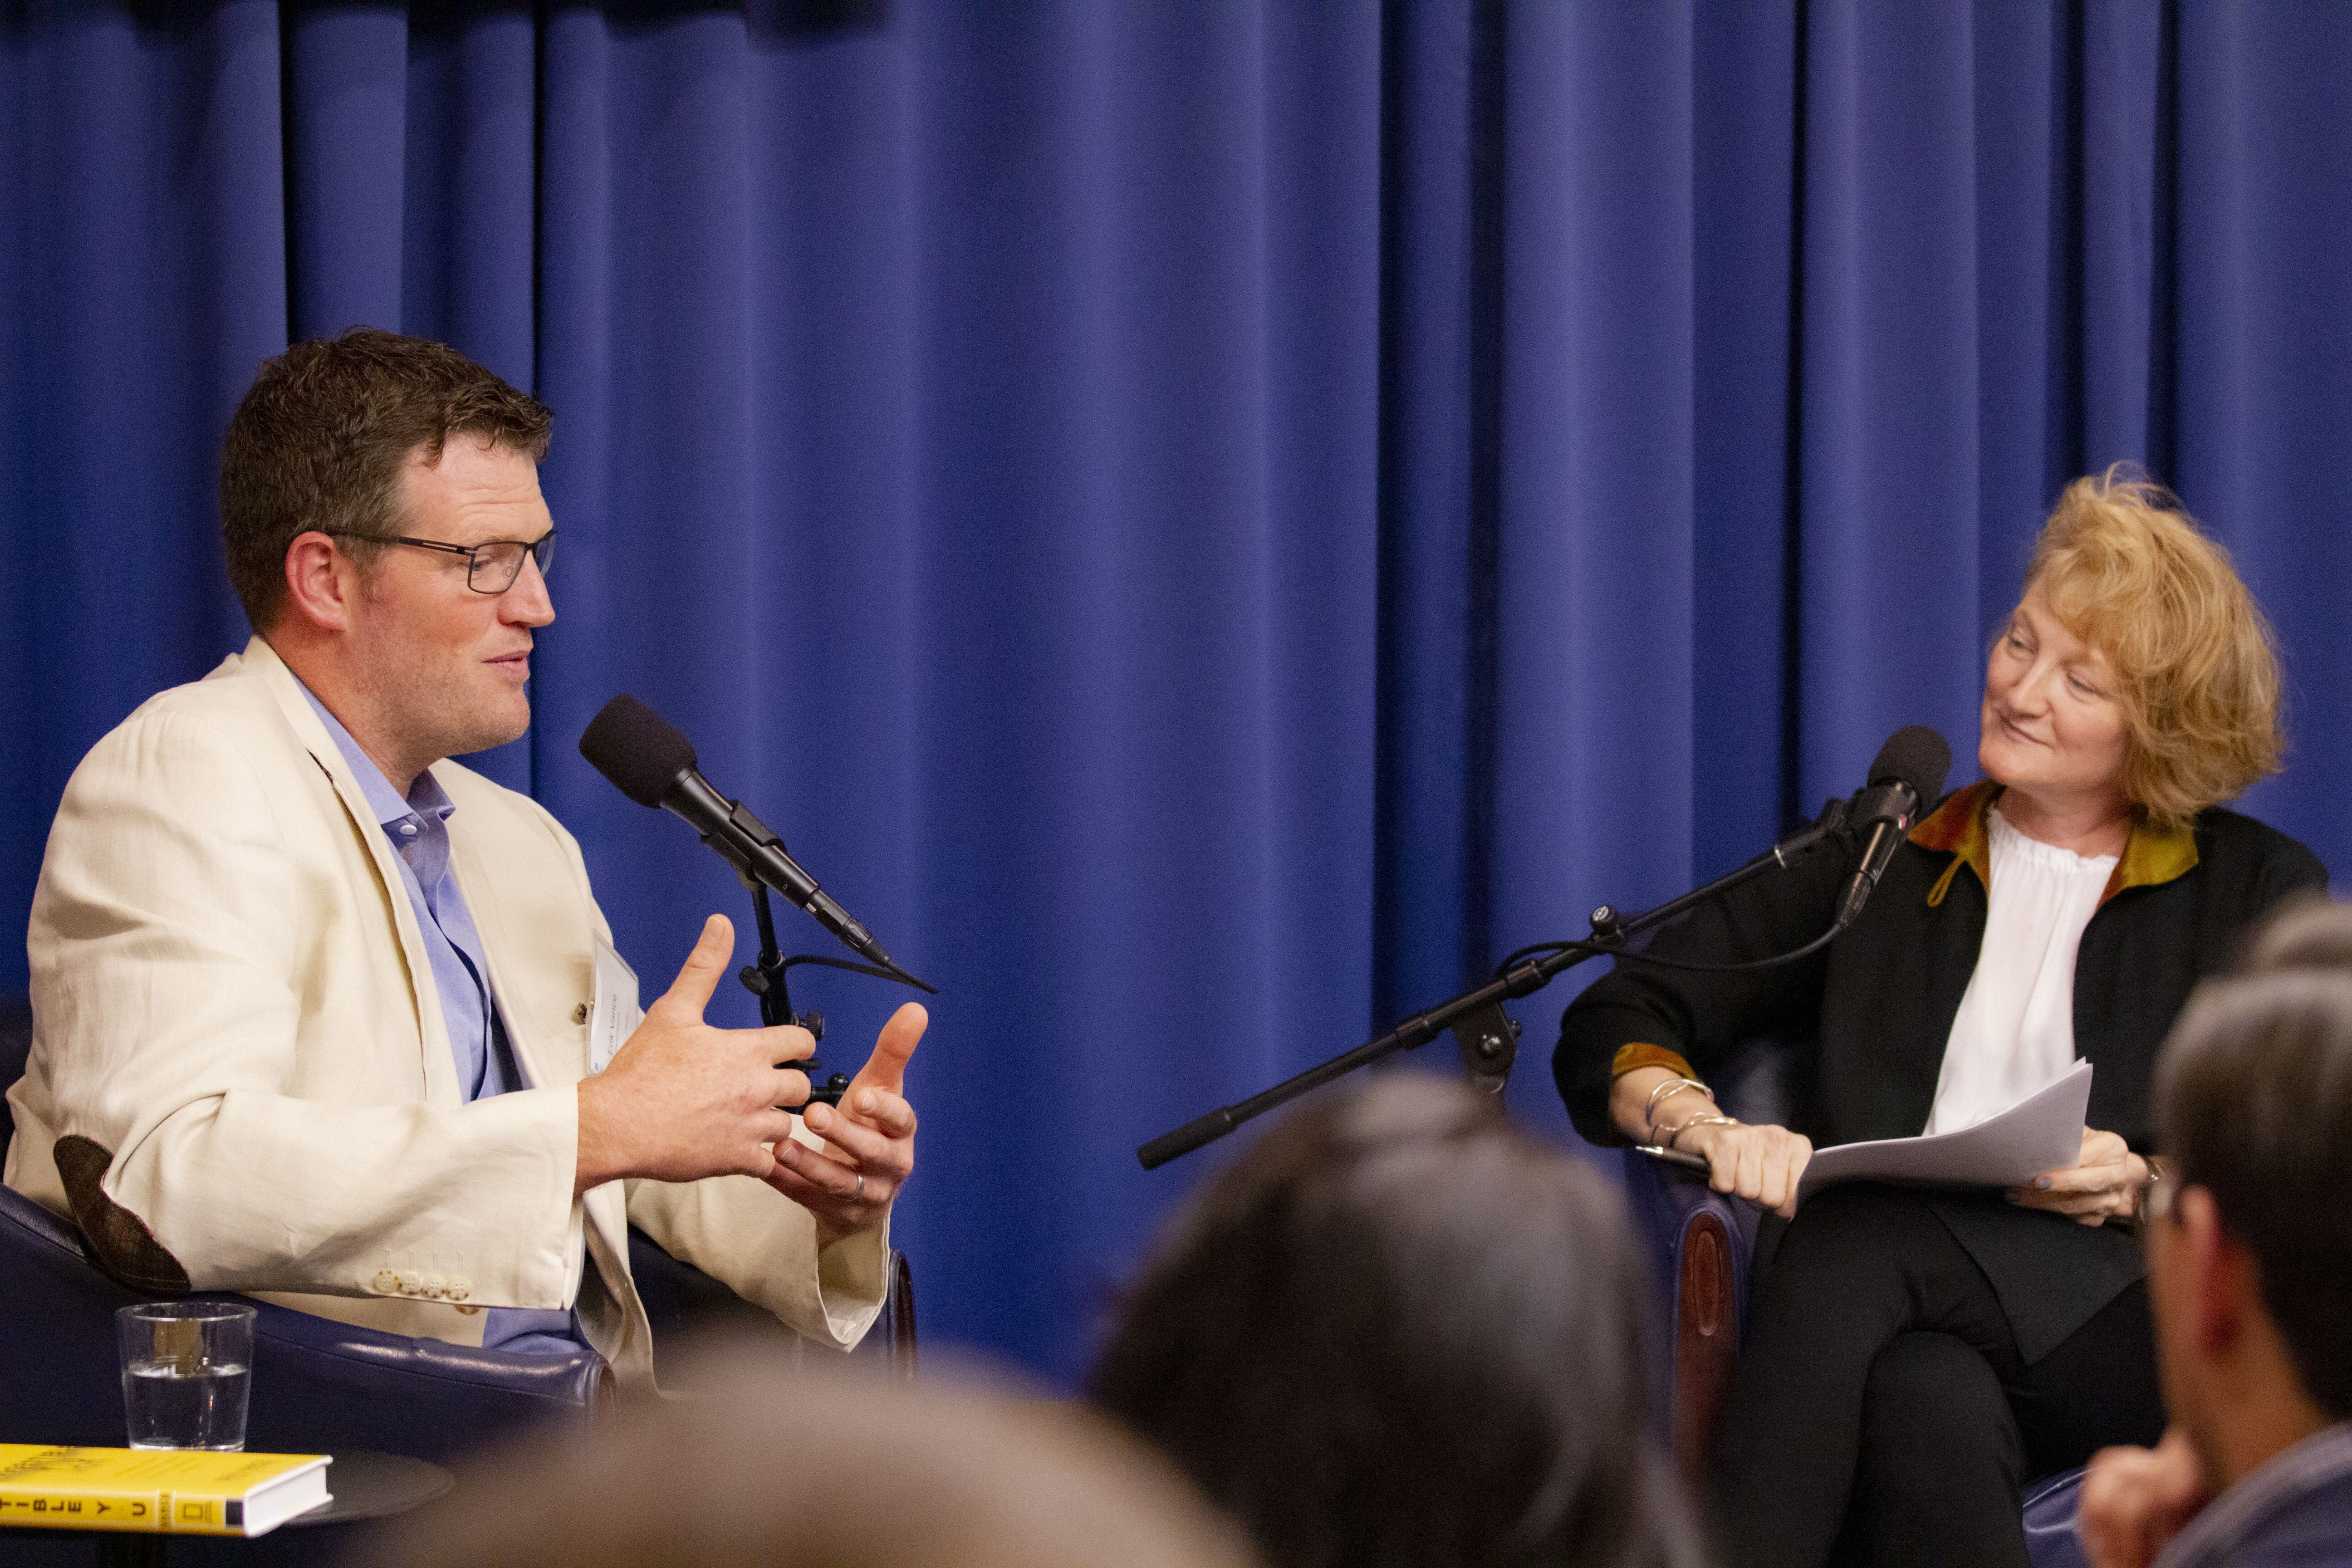 Grantee Erik Vance and On Being radio host Krista Tippett discuss ways to bridge the gap between science and religion. Image by Jin Ding. Washington, D.C., 2019.